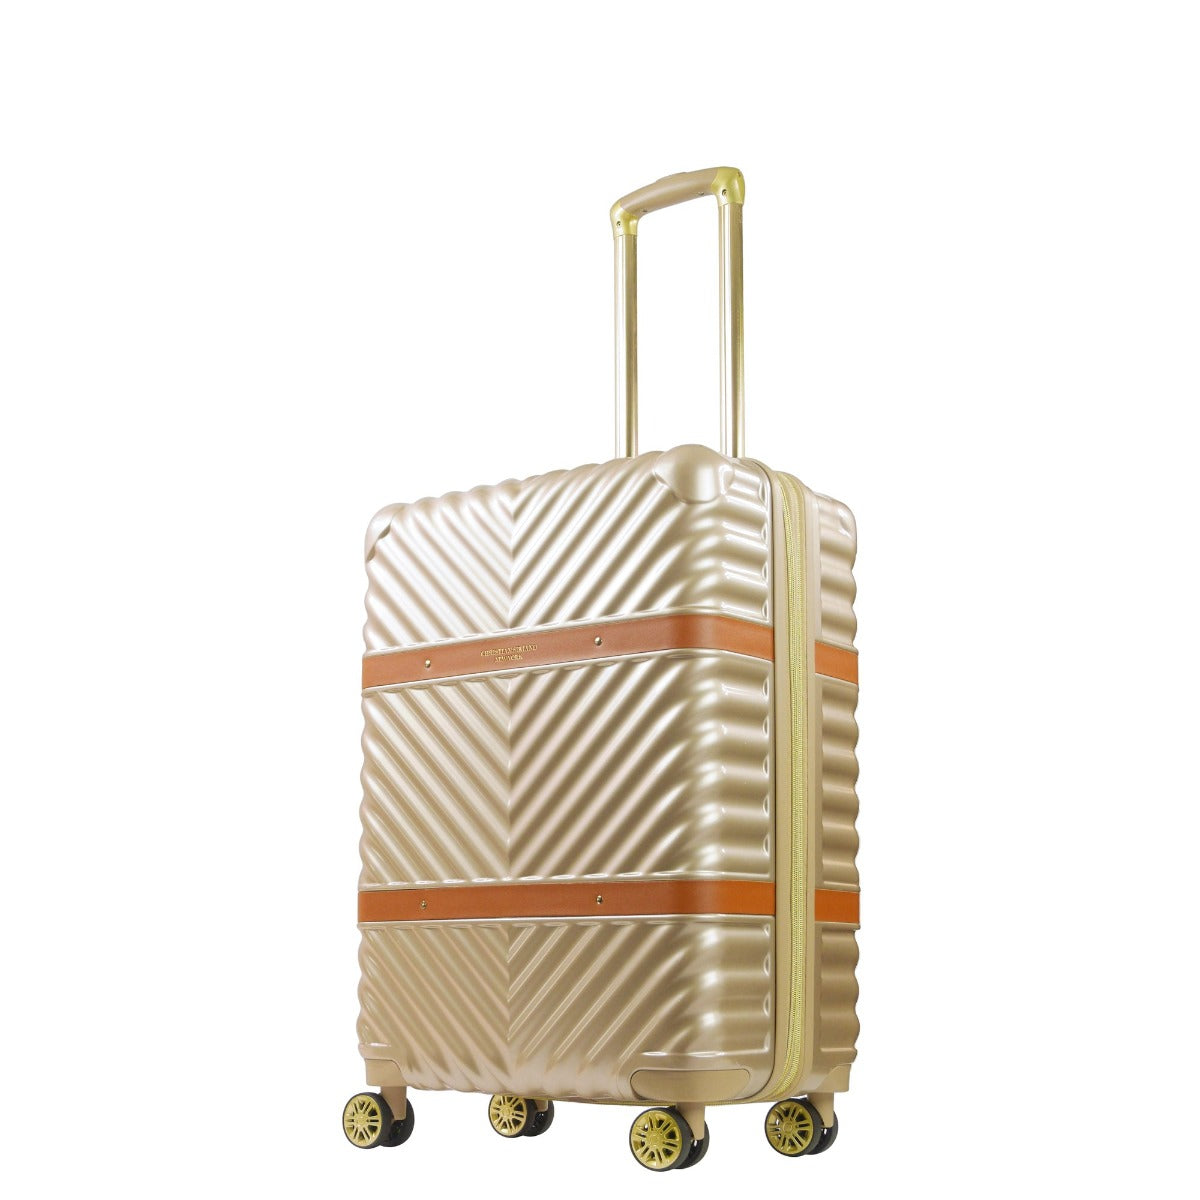 Christian Siriano New York Stella 25" checked luggage hardside spinner suitcase taupe - best suitcases for travelling